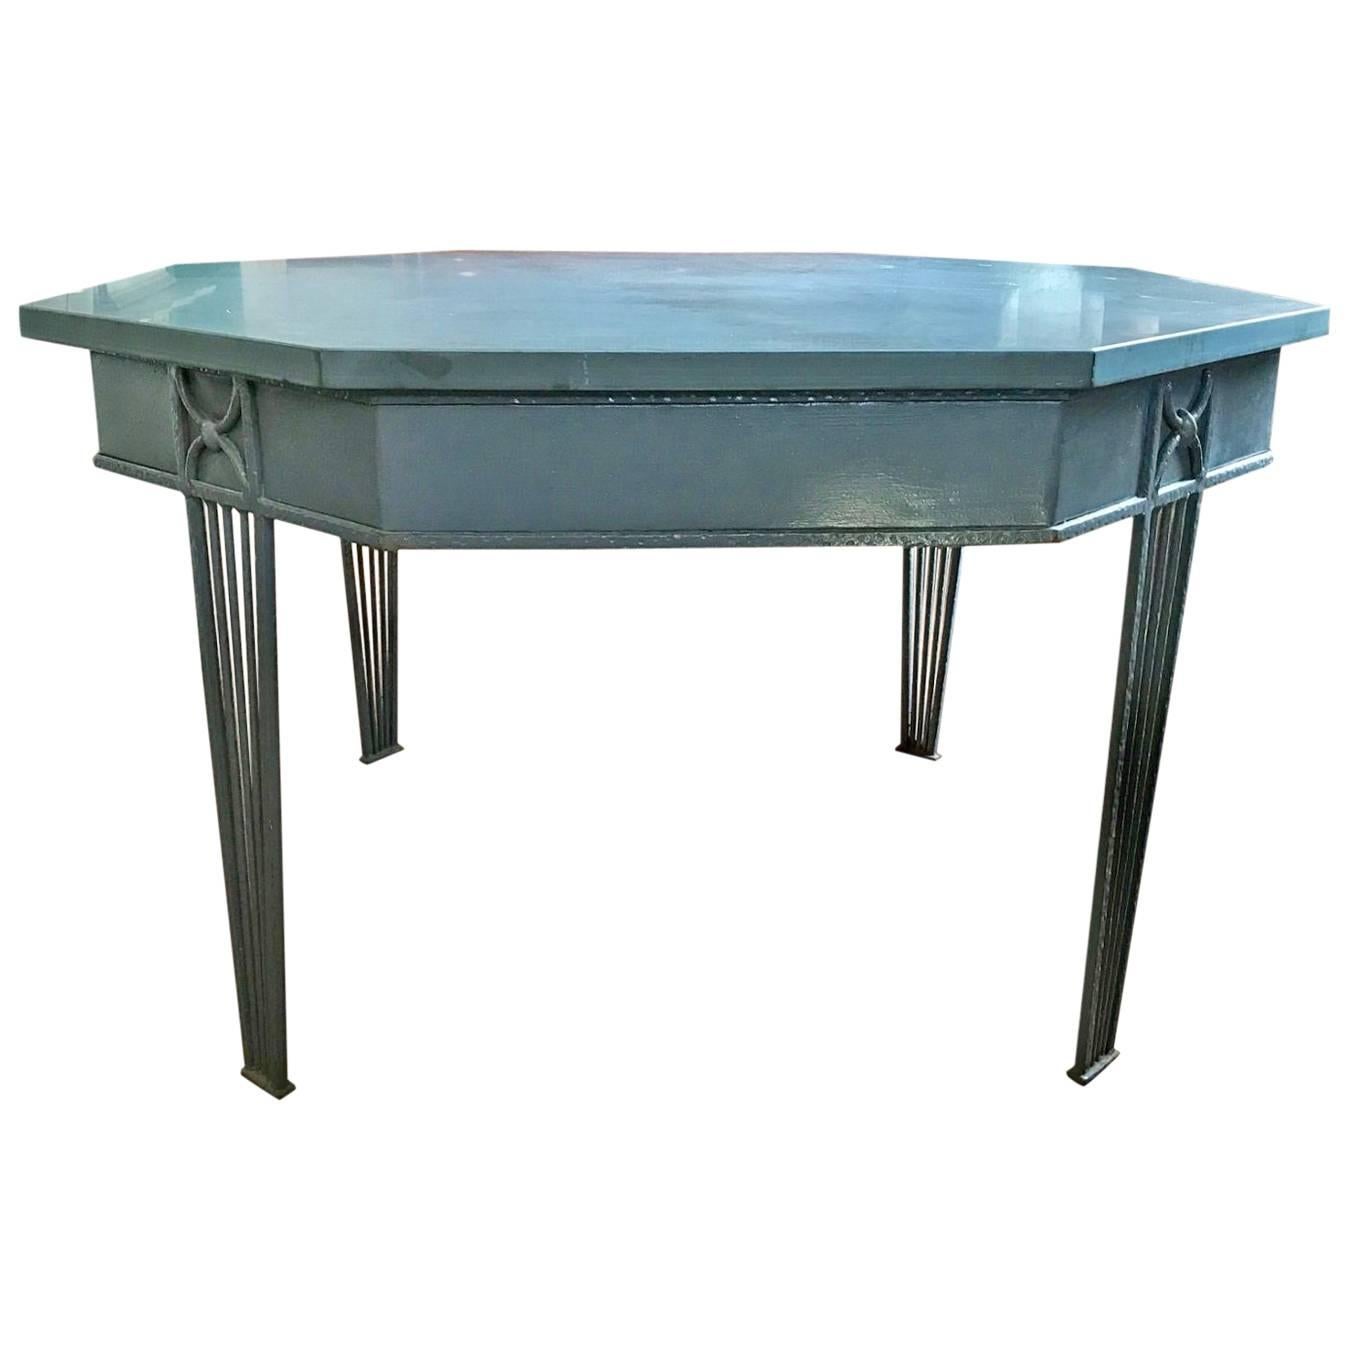 Large Octagonal Iron Dining Table, Center Table or Garden Table with Slate Top For Sale